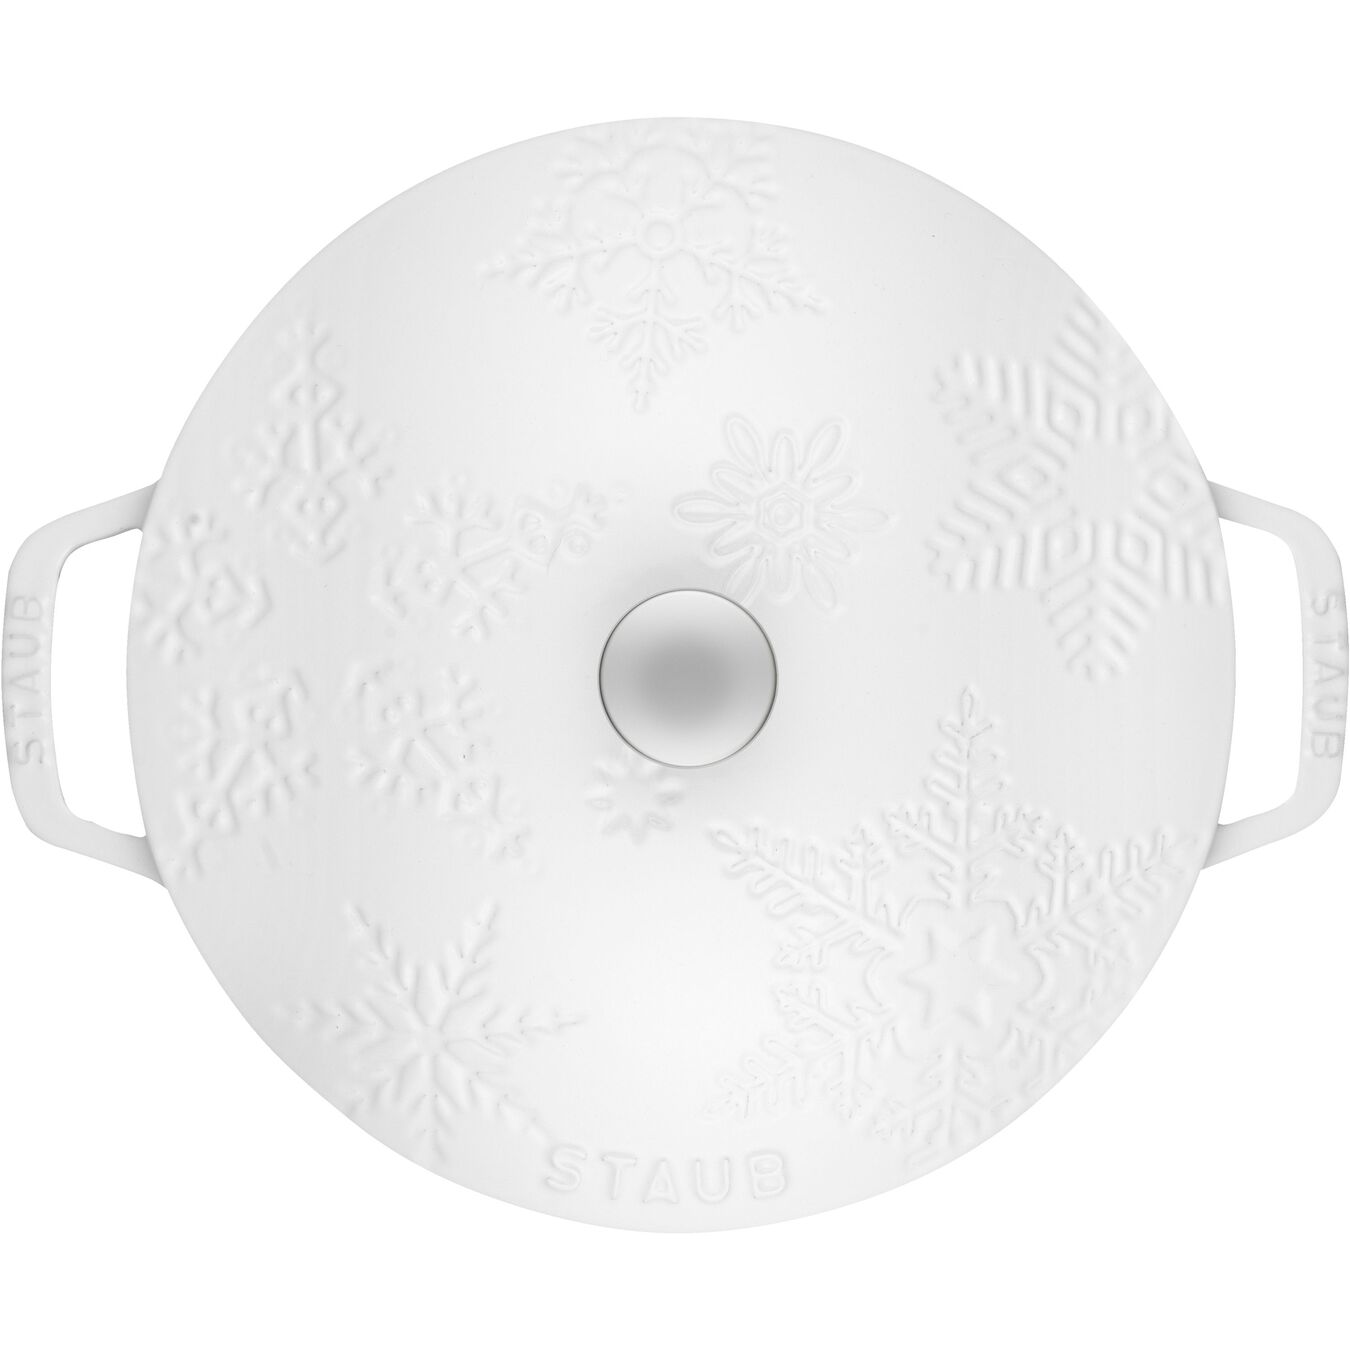 3.75 qt, French oven, white,,large 3